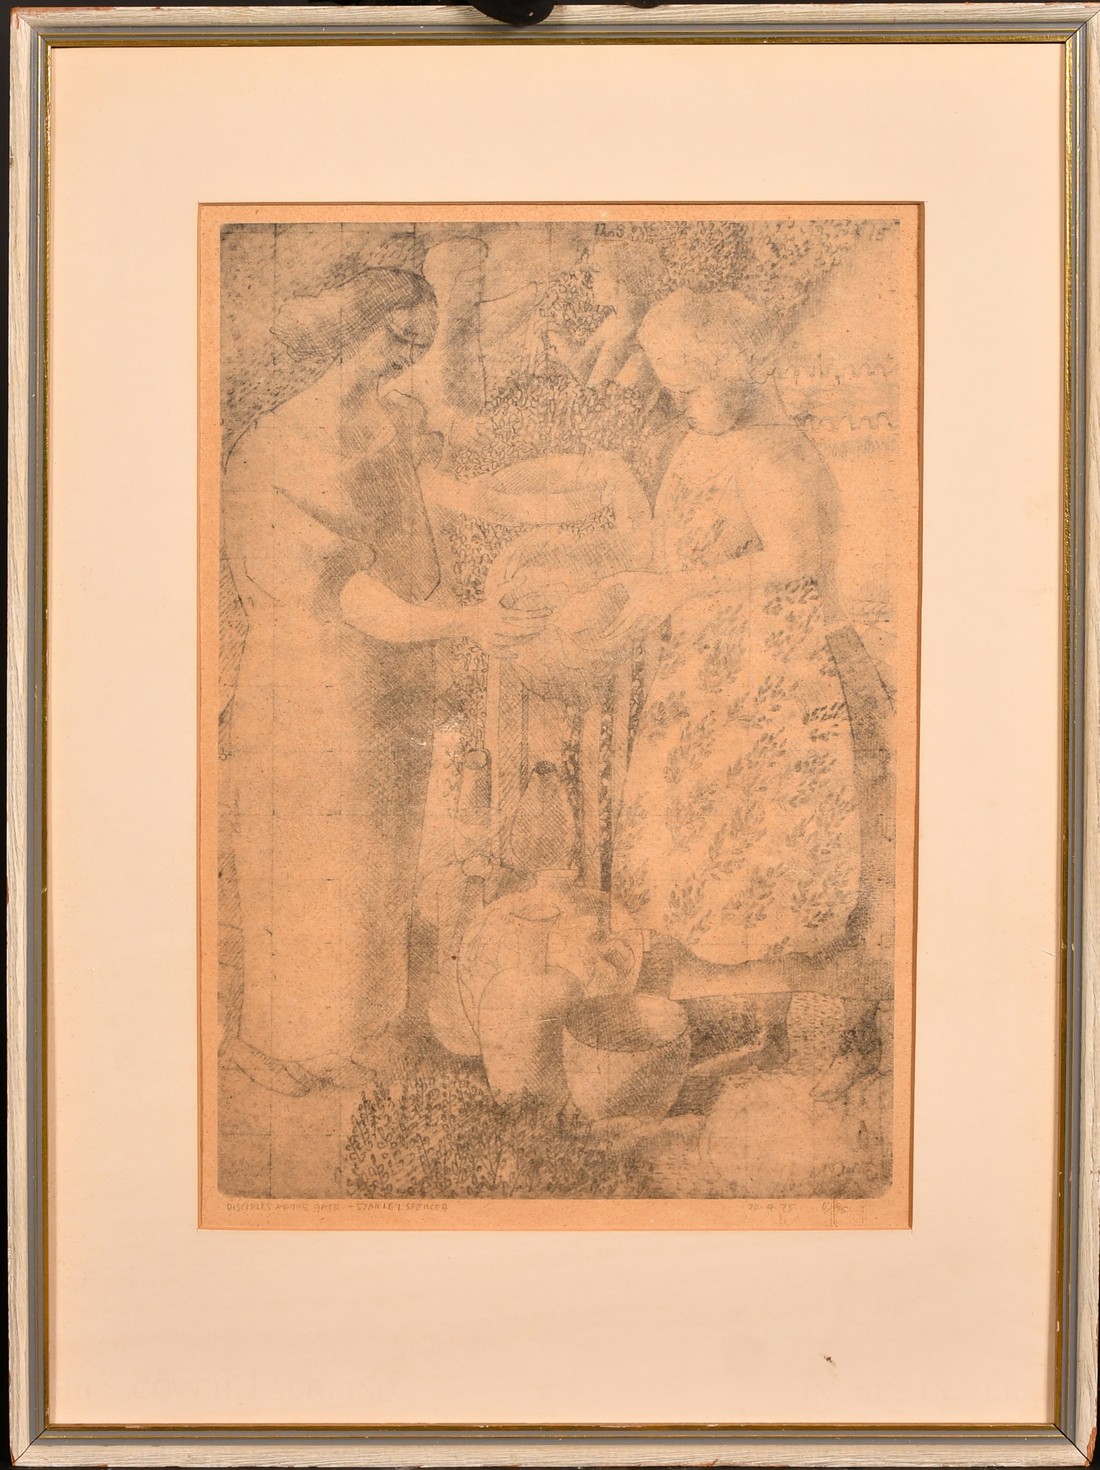 After Stanley Spencer, 'Disciples at the Gate', photolithograph, inscribed in pencil and dated 20. - Image 2 of 4